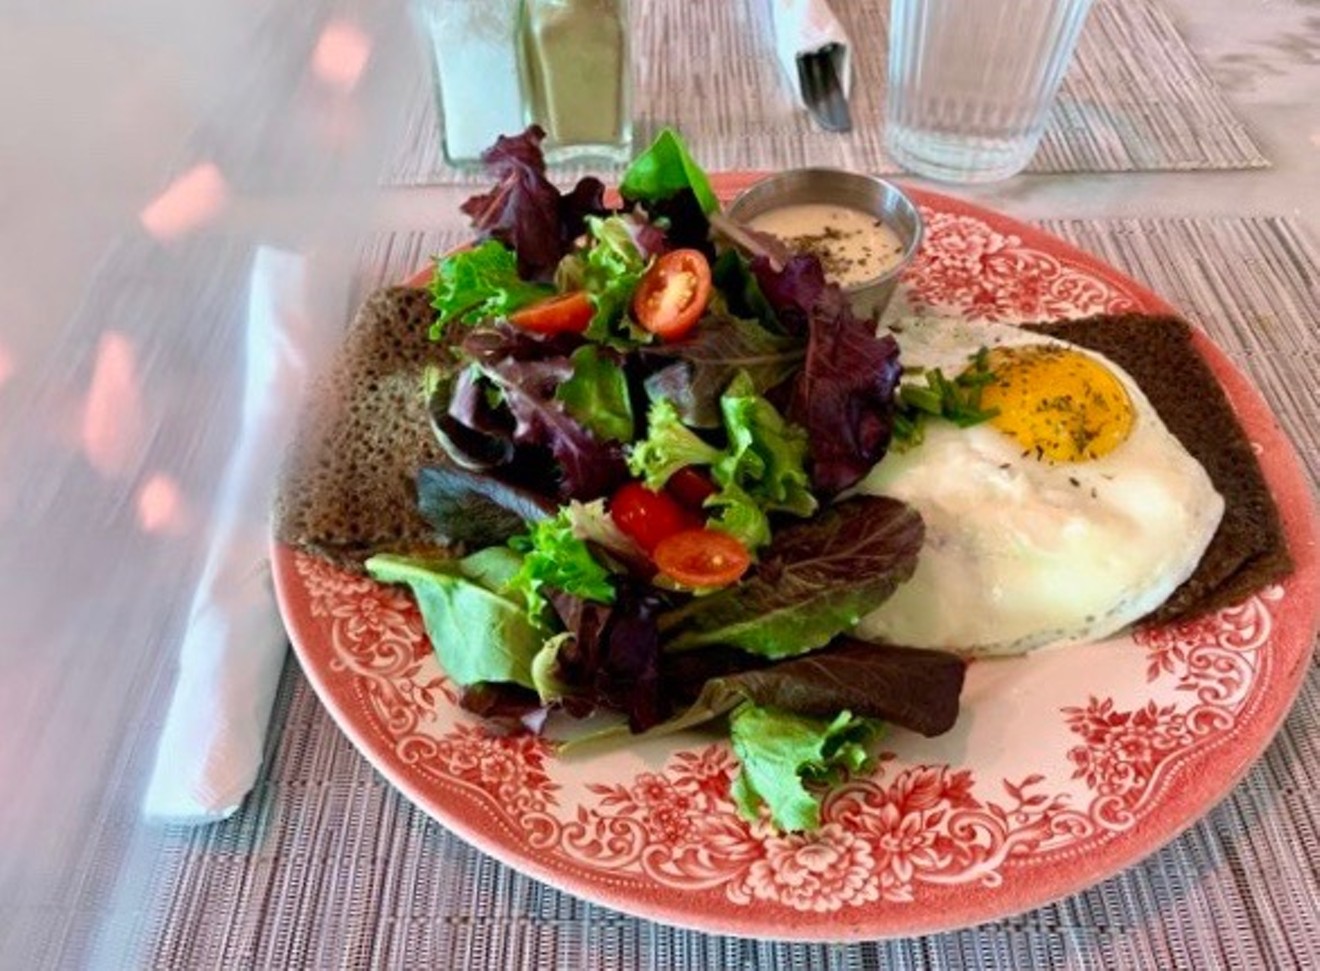 https://media2.phoenixnewtimes.com/phx/imager/7-spots-for-great-crepes-in-metro-phoenix/u/magnum/11488268/duc_liao_for_merci_french_cafe.jpg?cb=1642609087